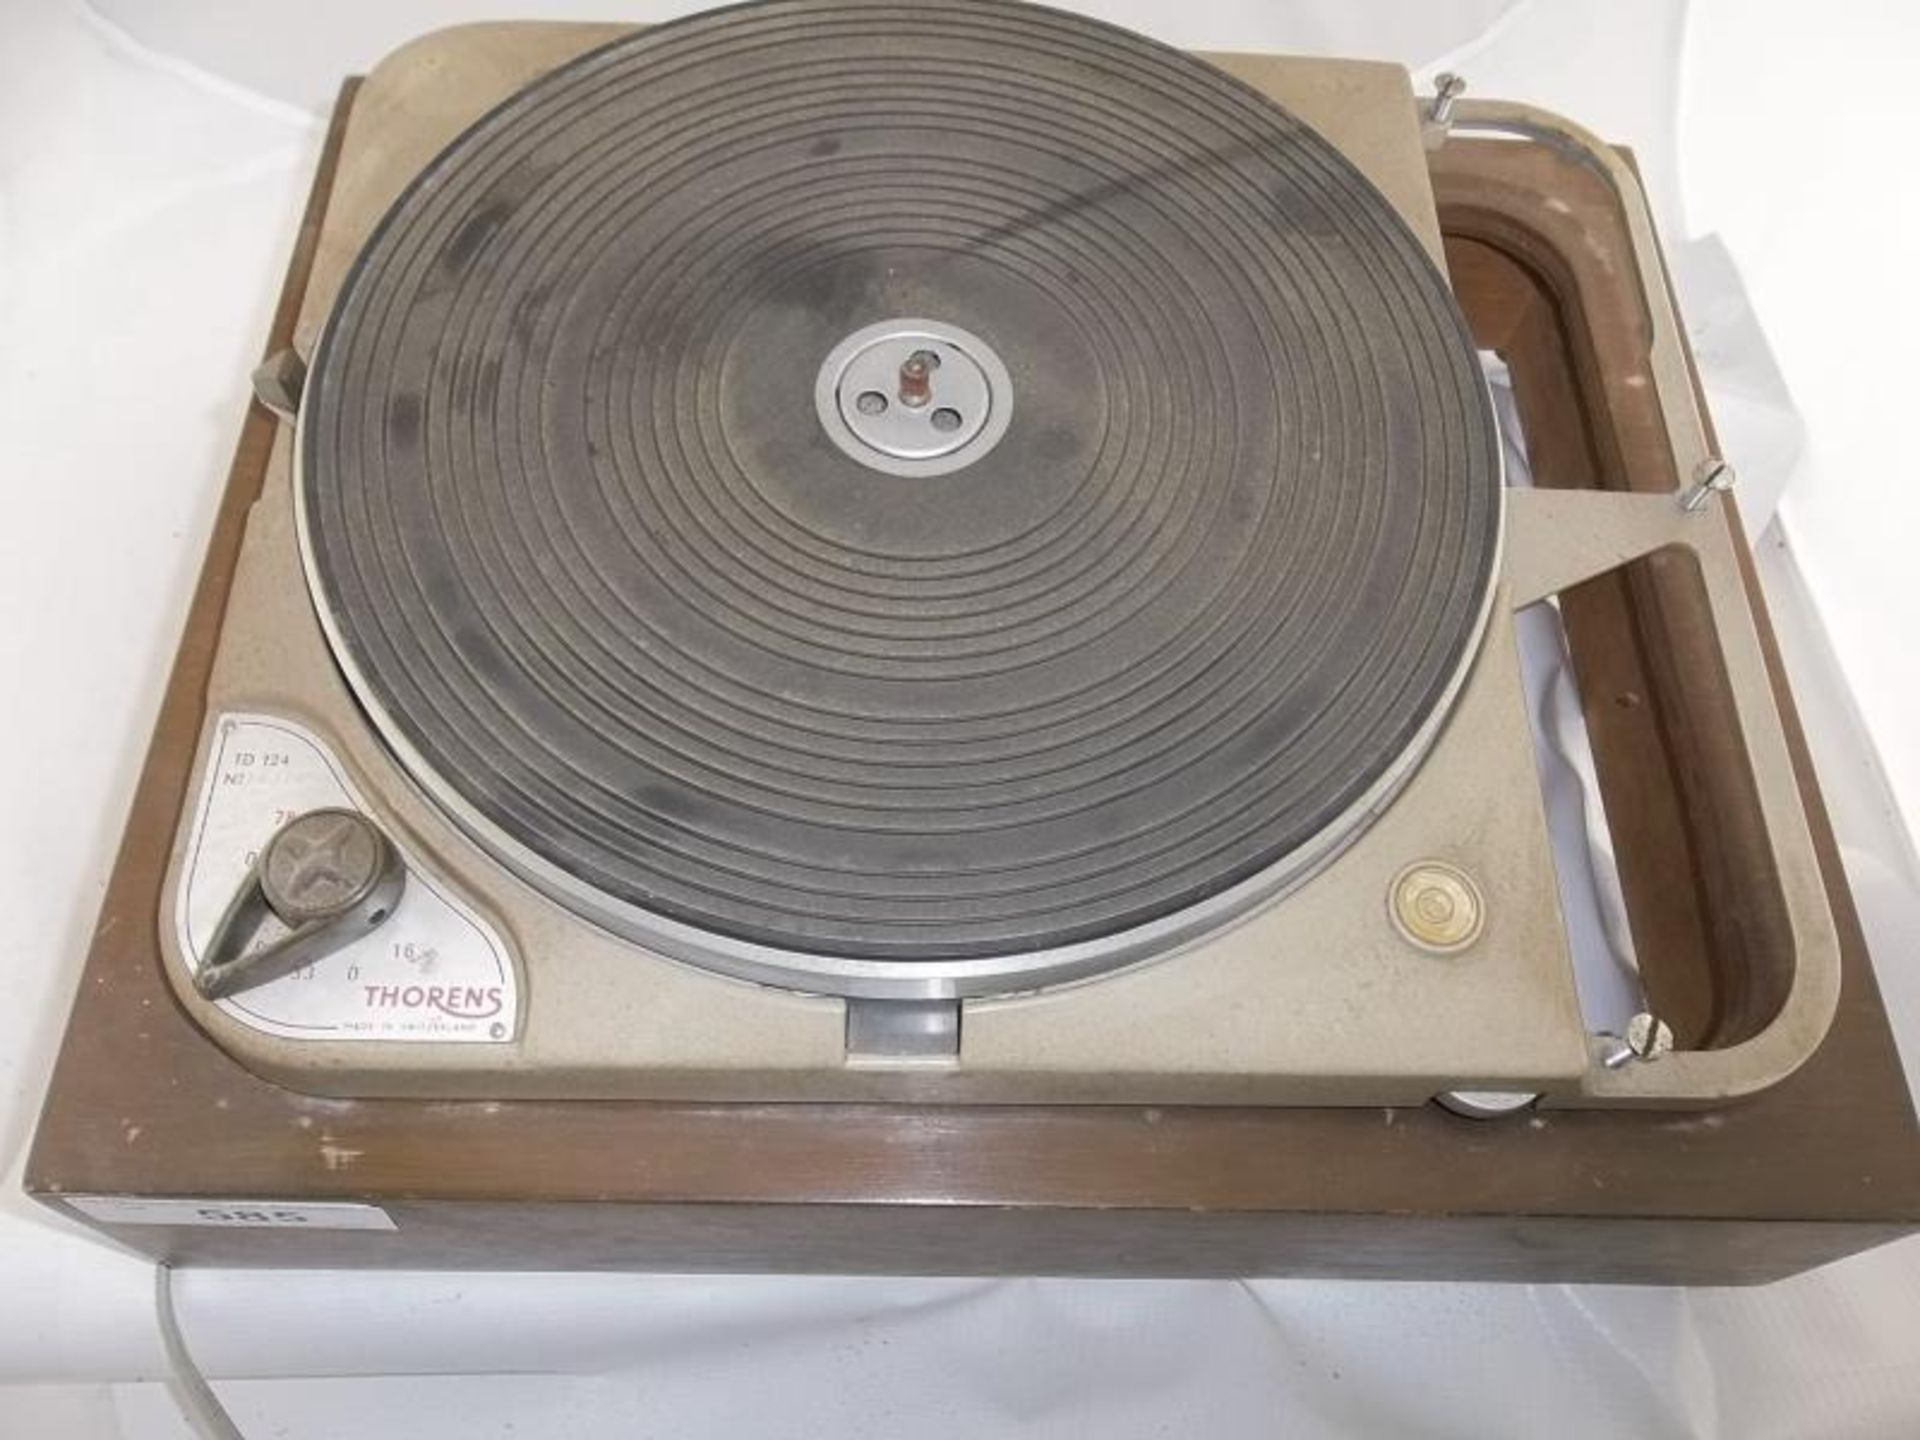 Thorens TD 124 turntable, #38070, made in Switzerland, no arm board or arm, 16, 33, 45, 78